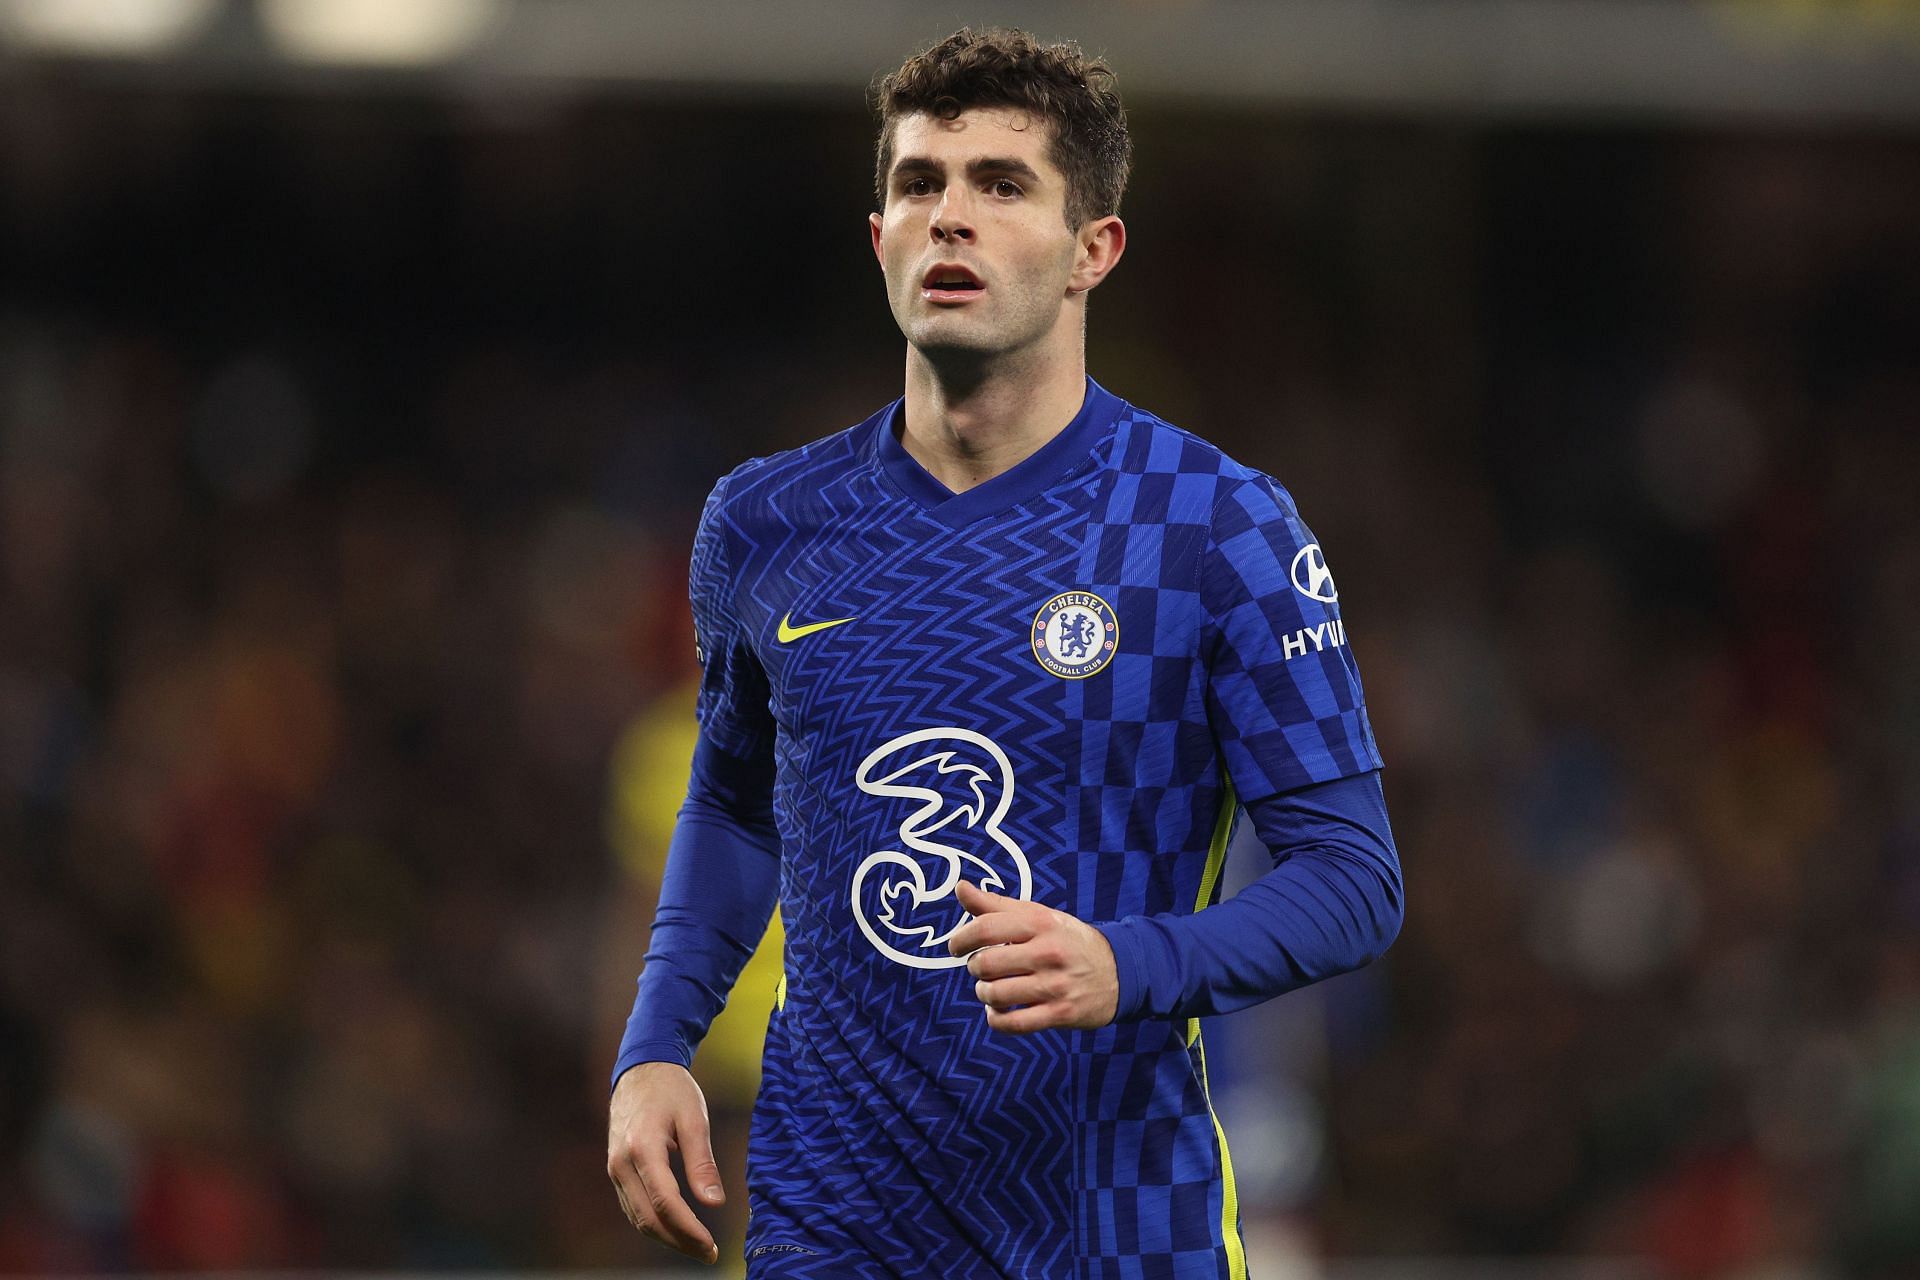 Pulisic has been plagued by injuries at Stamford Bridge